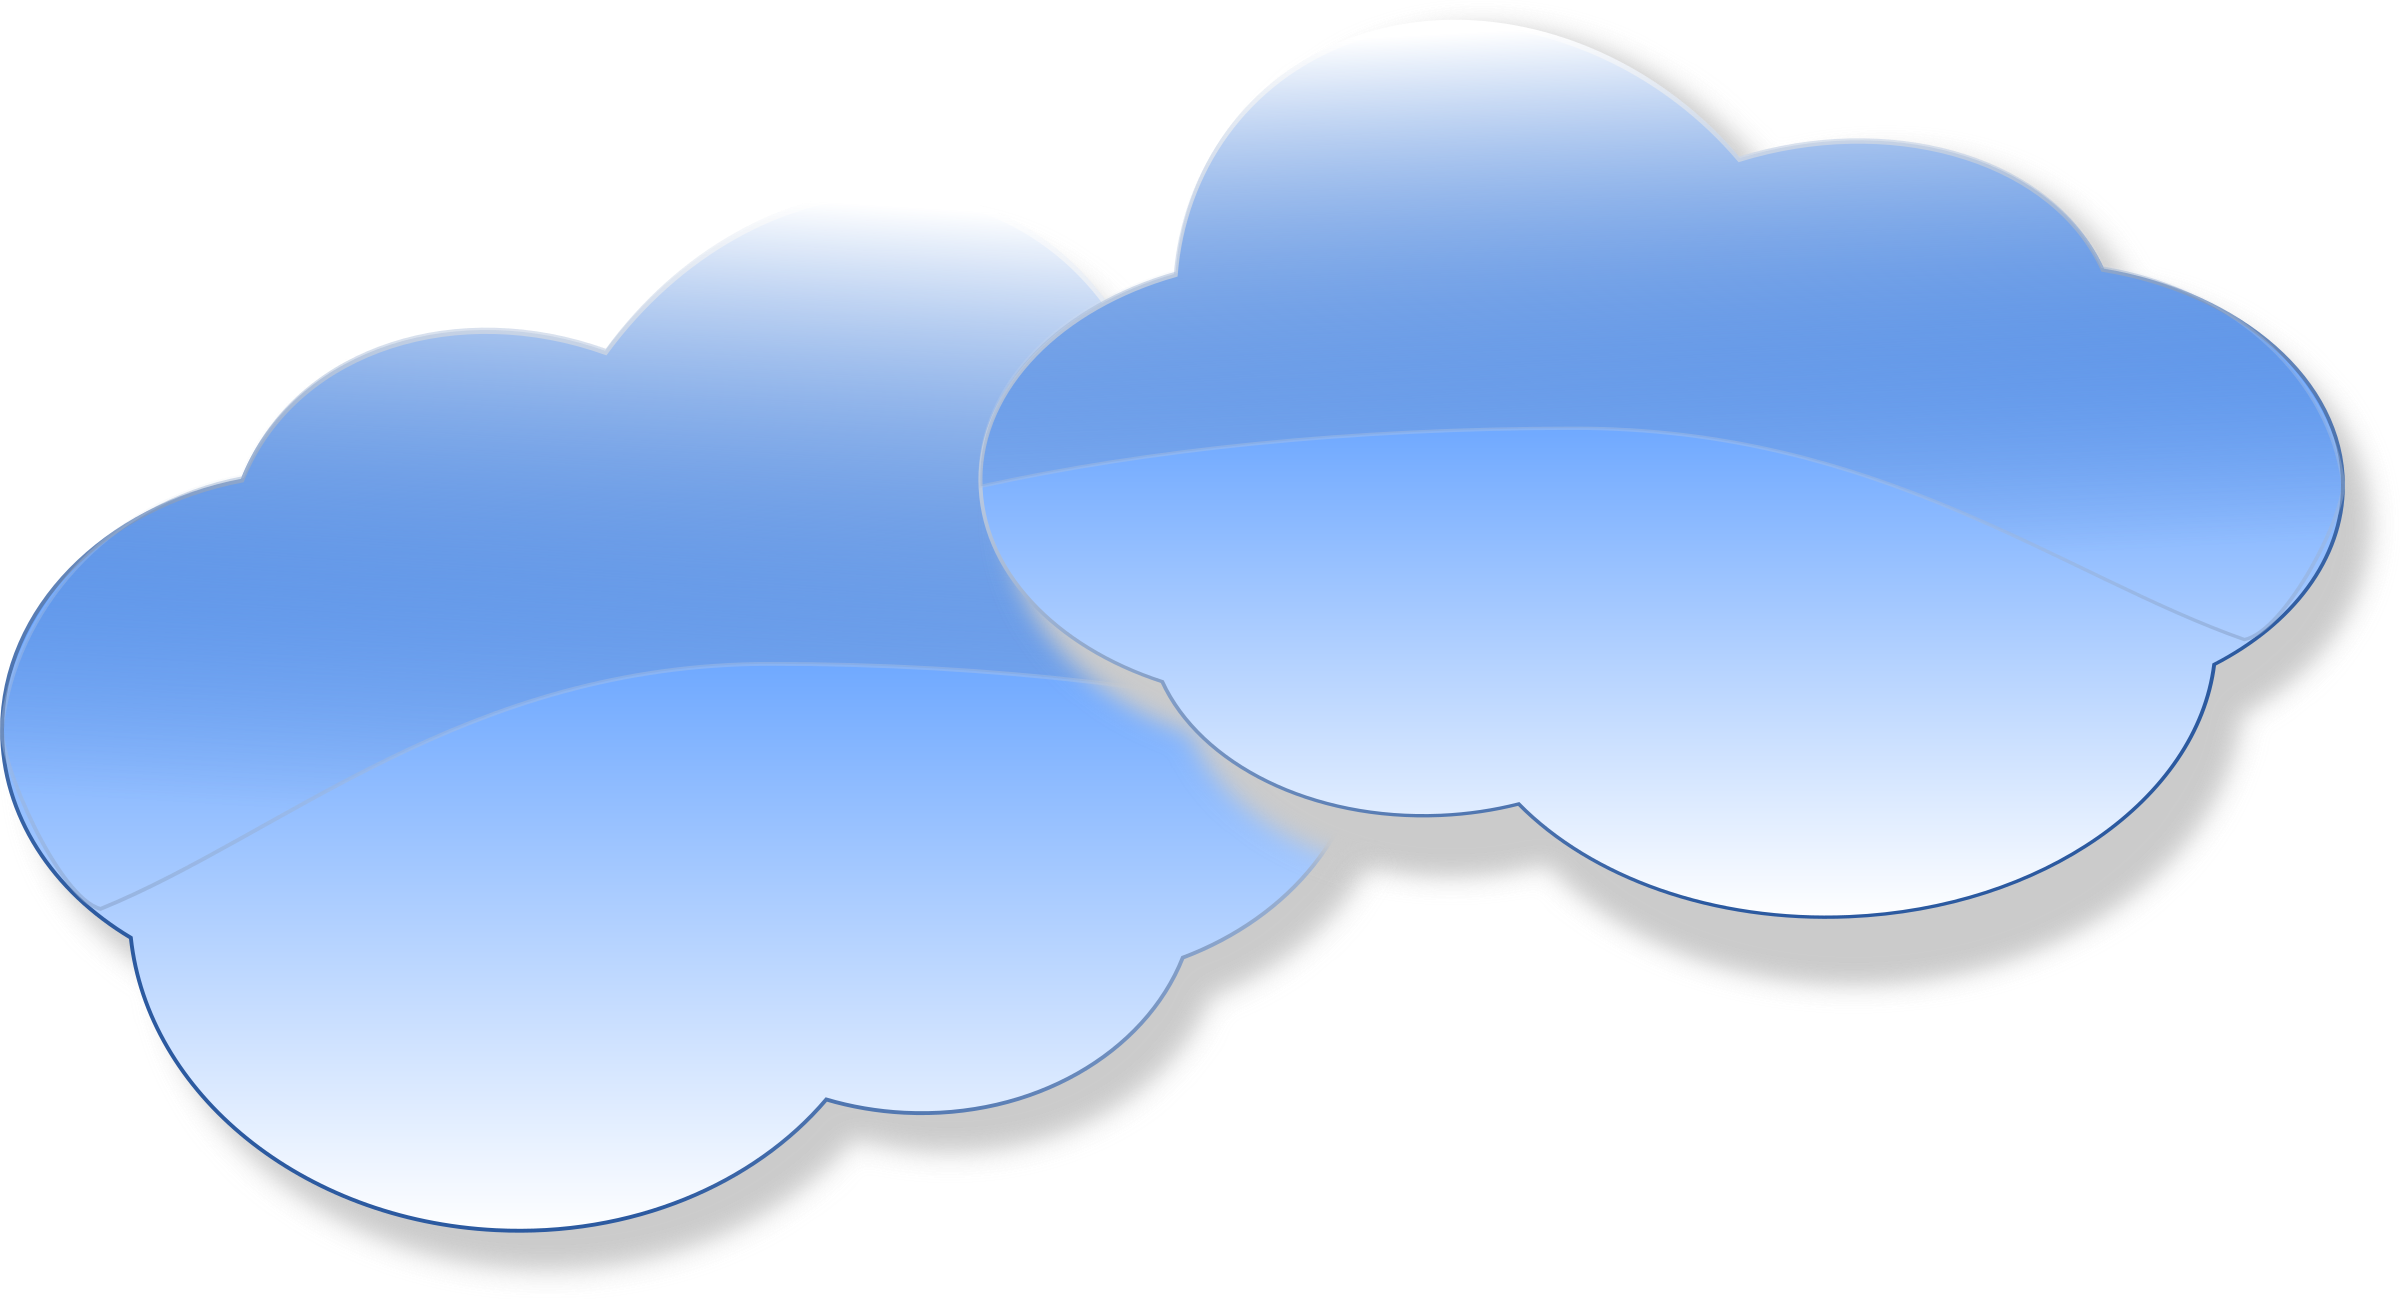 For Blue Clouds Clip Art Displaying 18 Images For Blue Clouds Clip Art